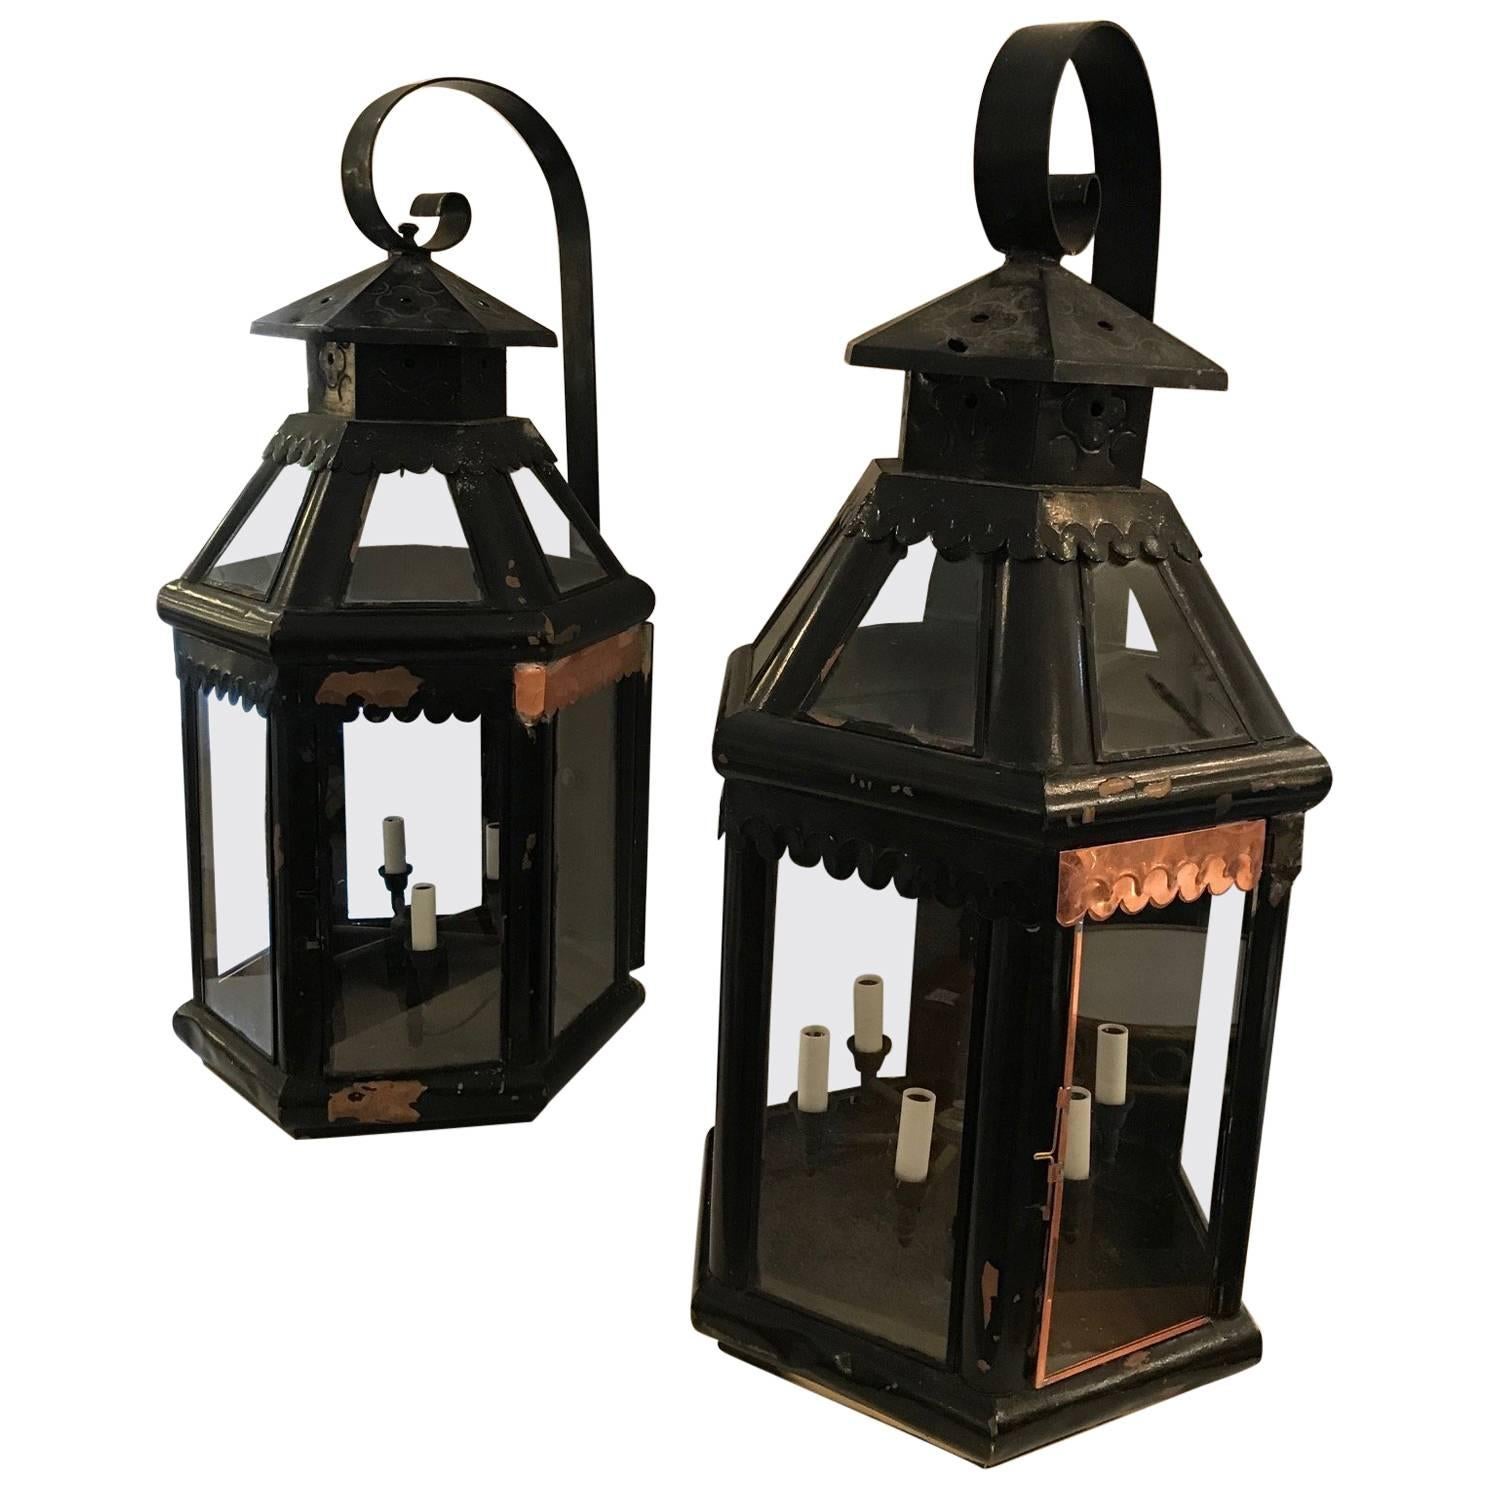 Monumentally Large Pair of Antique Copper Painted Lanterns